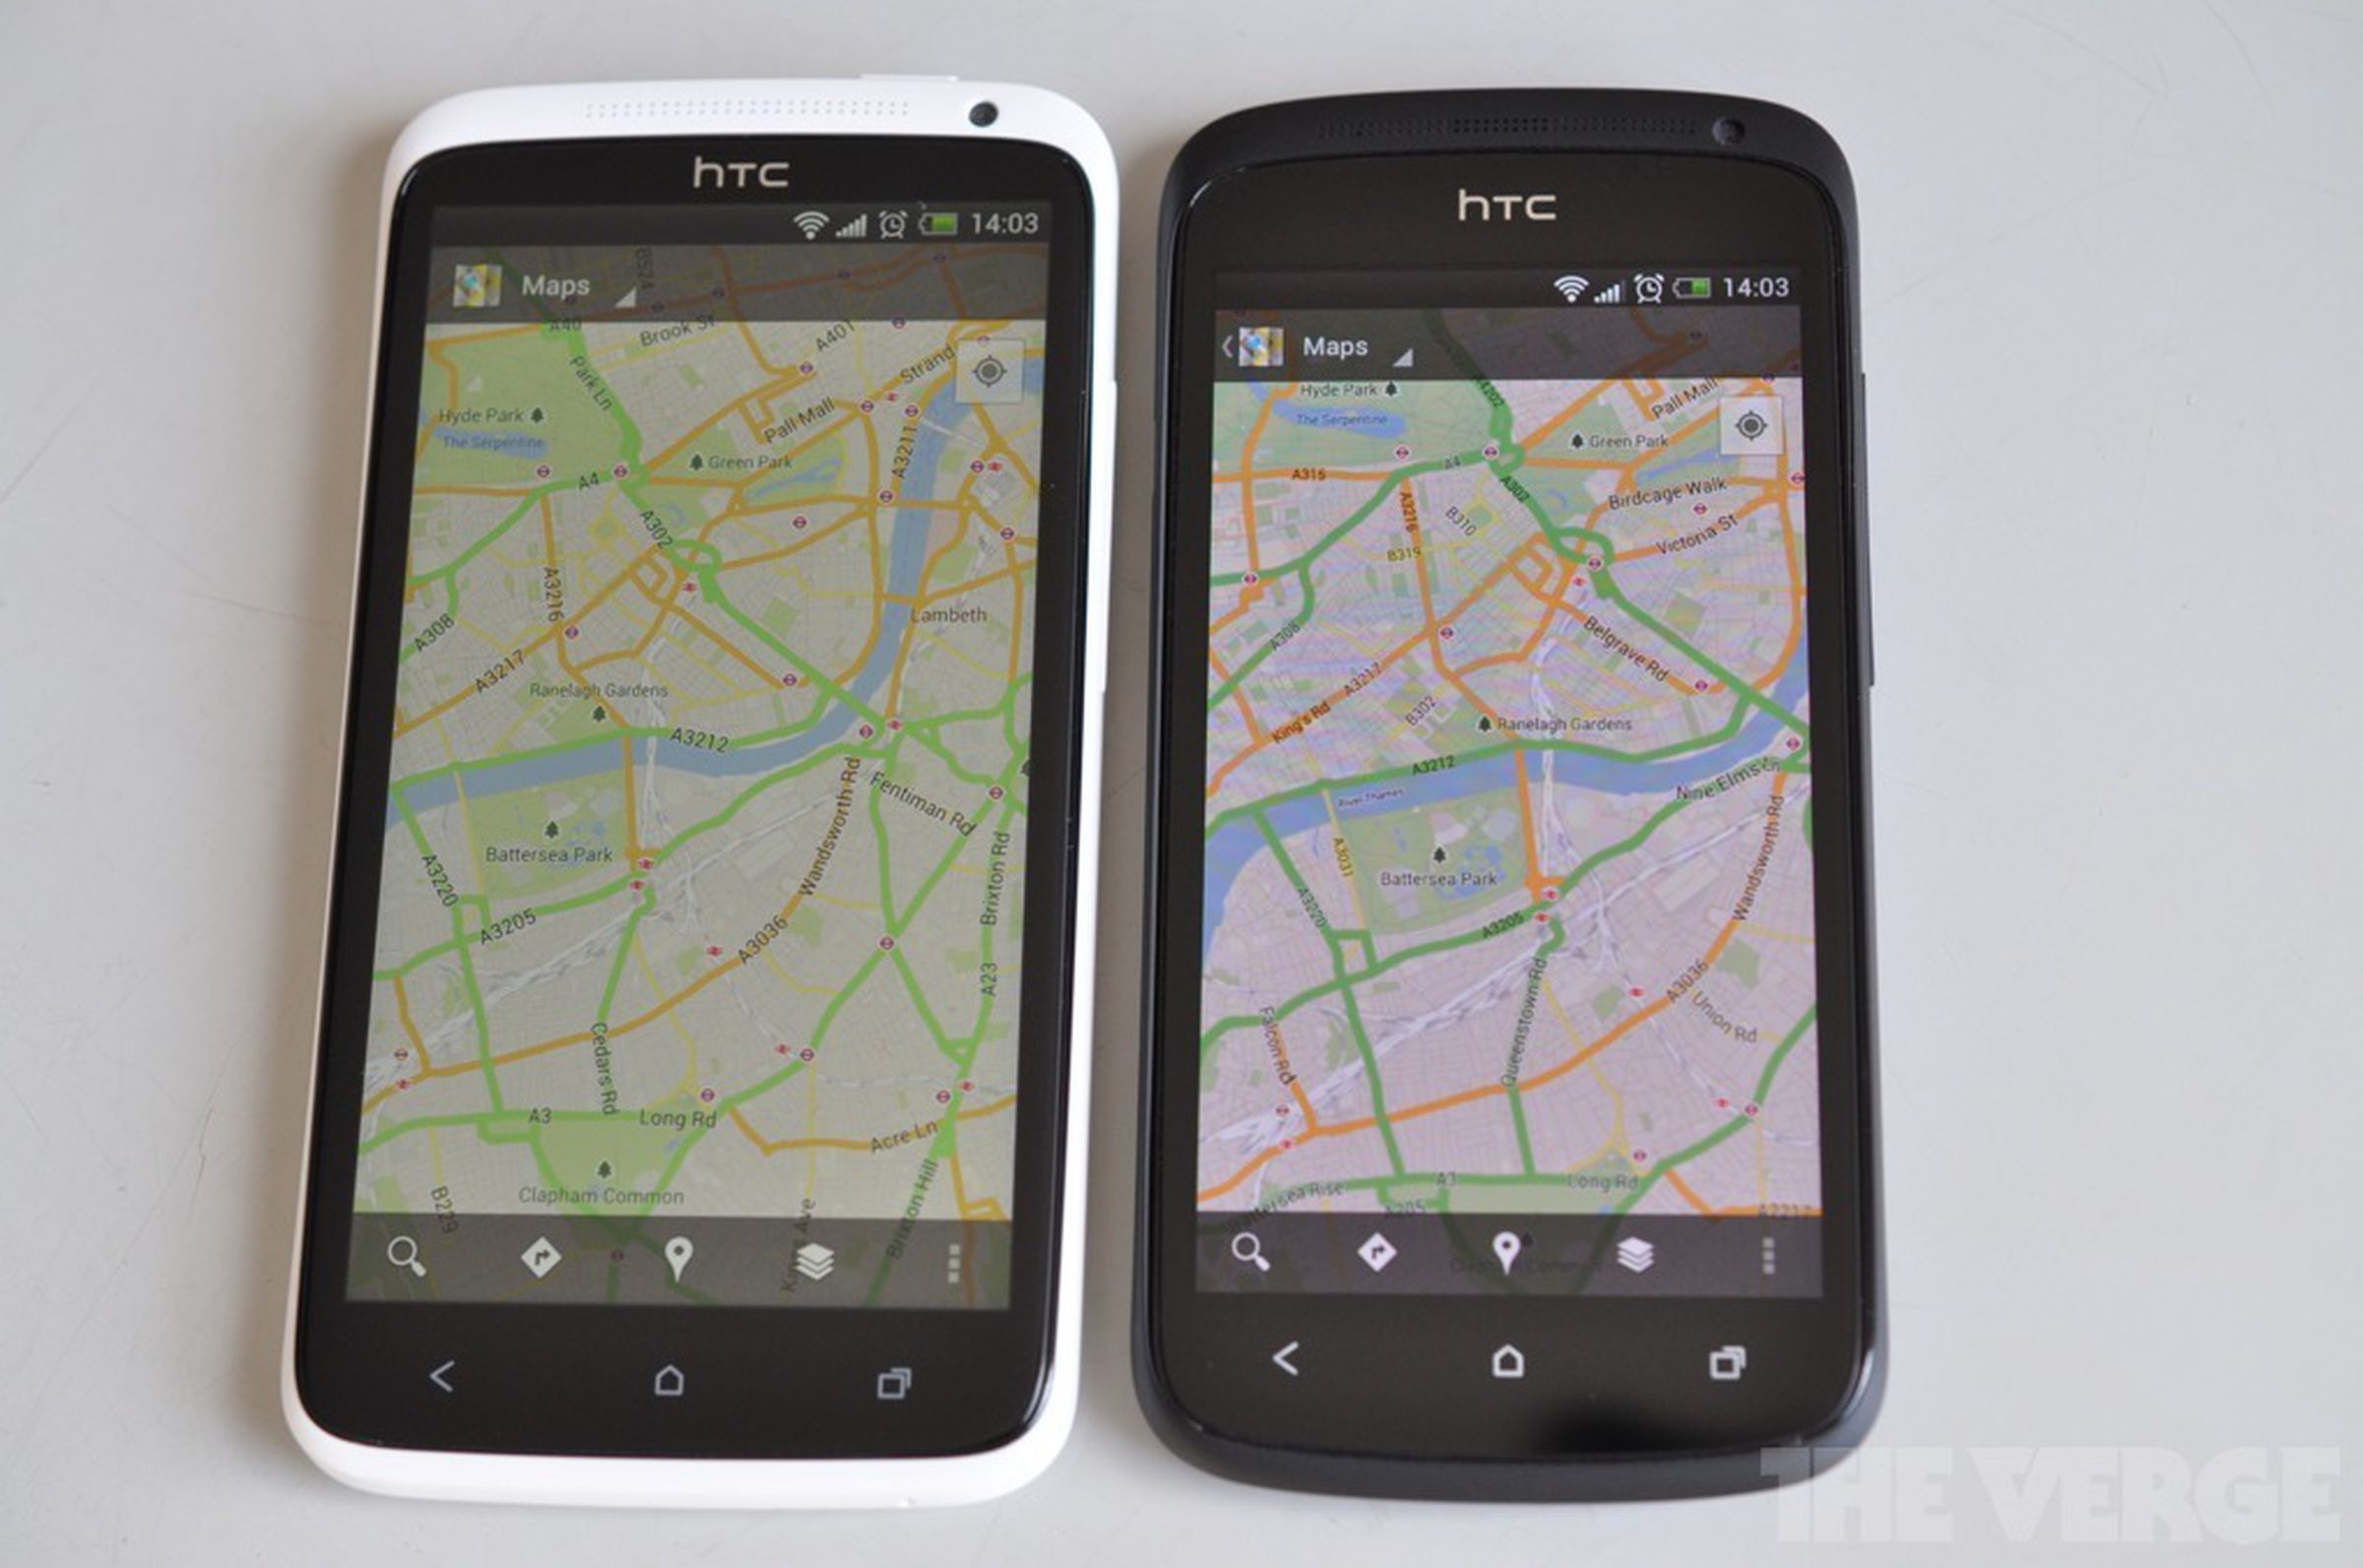 HTC One S vs. One X pictures